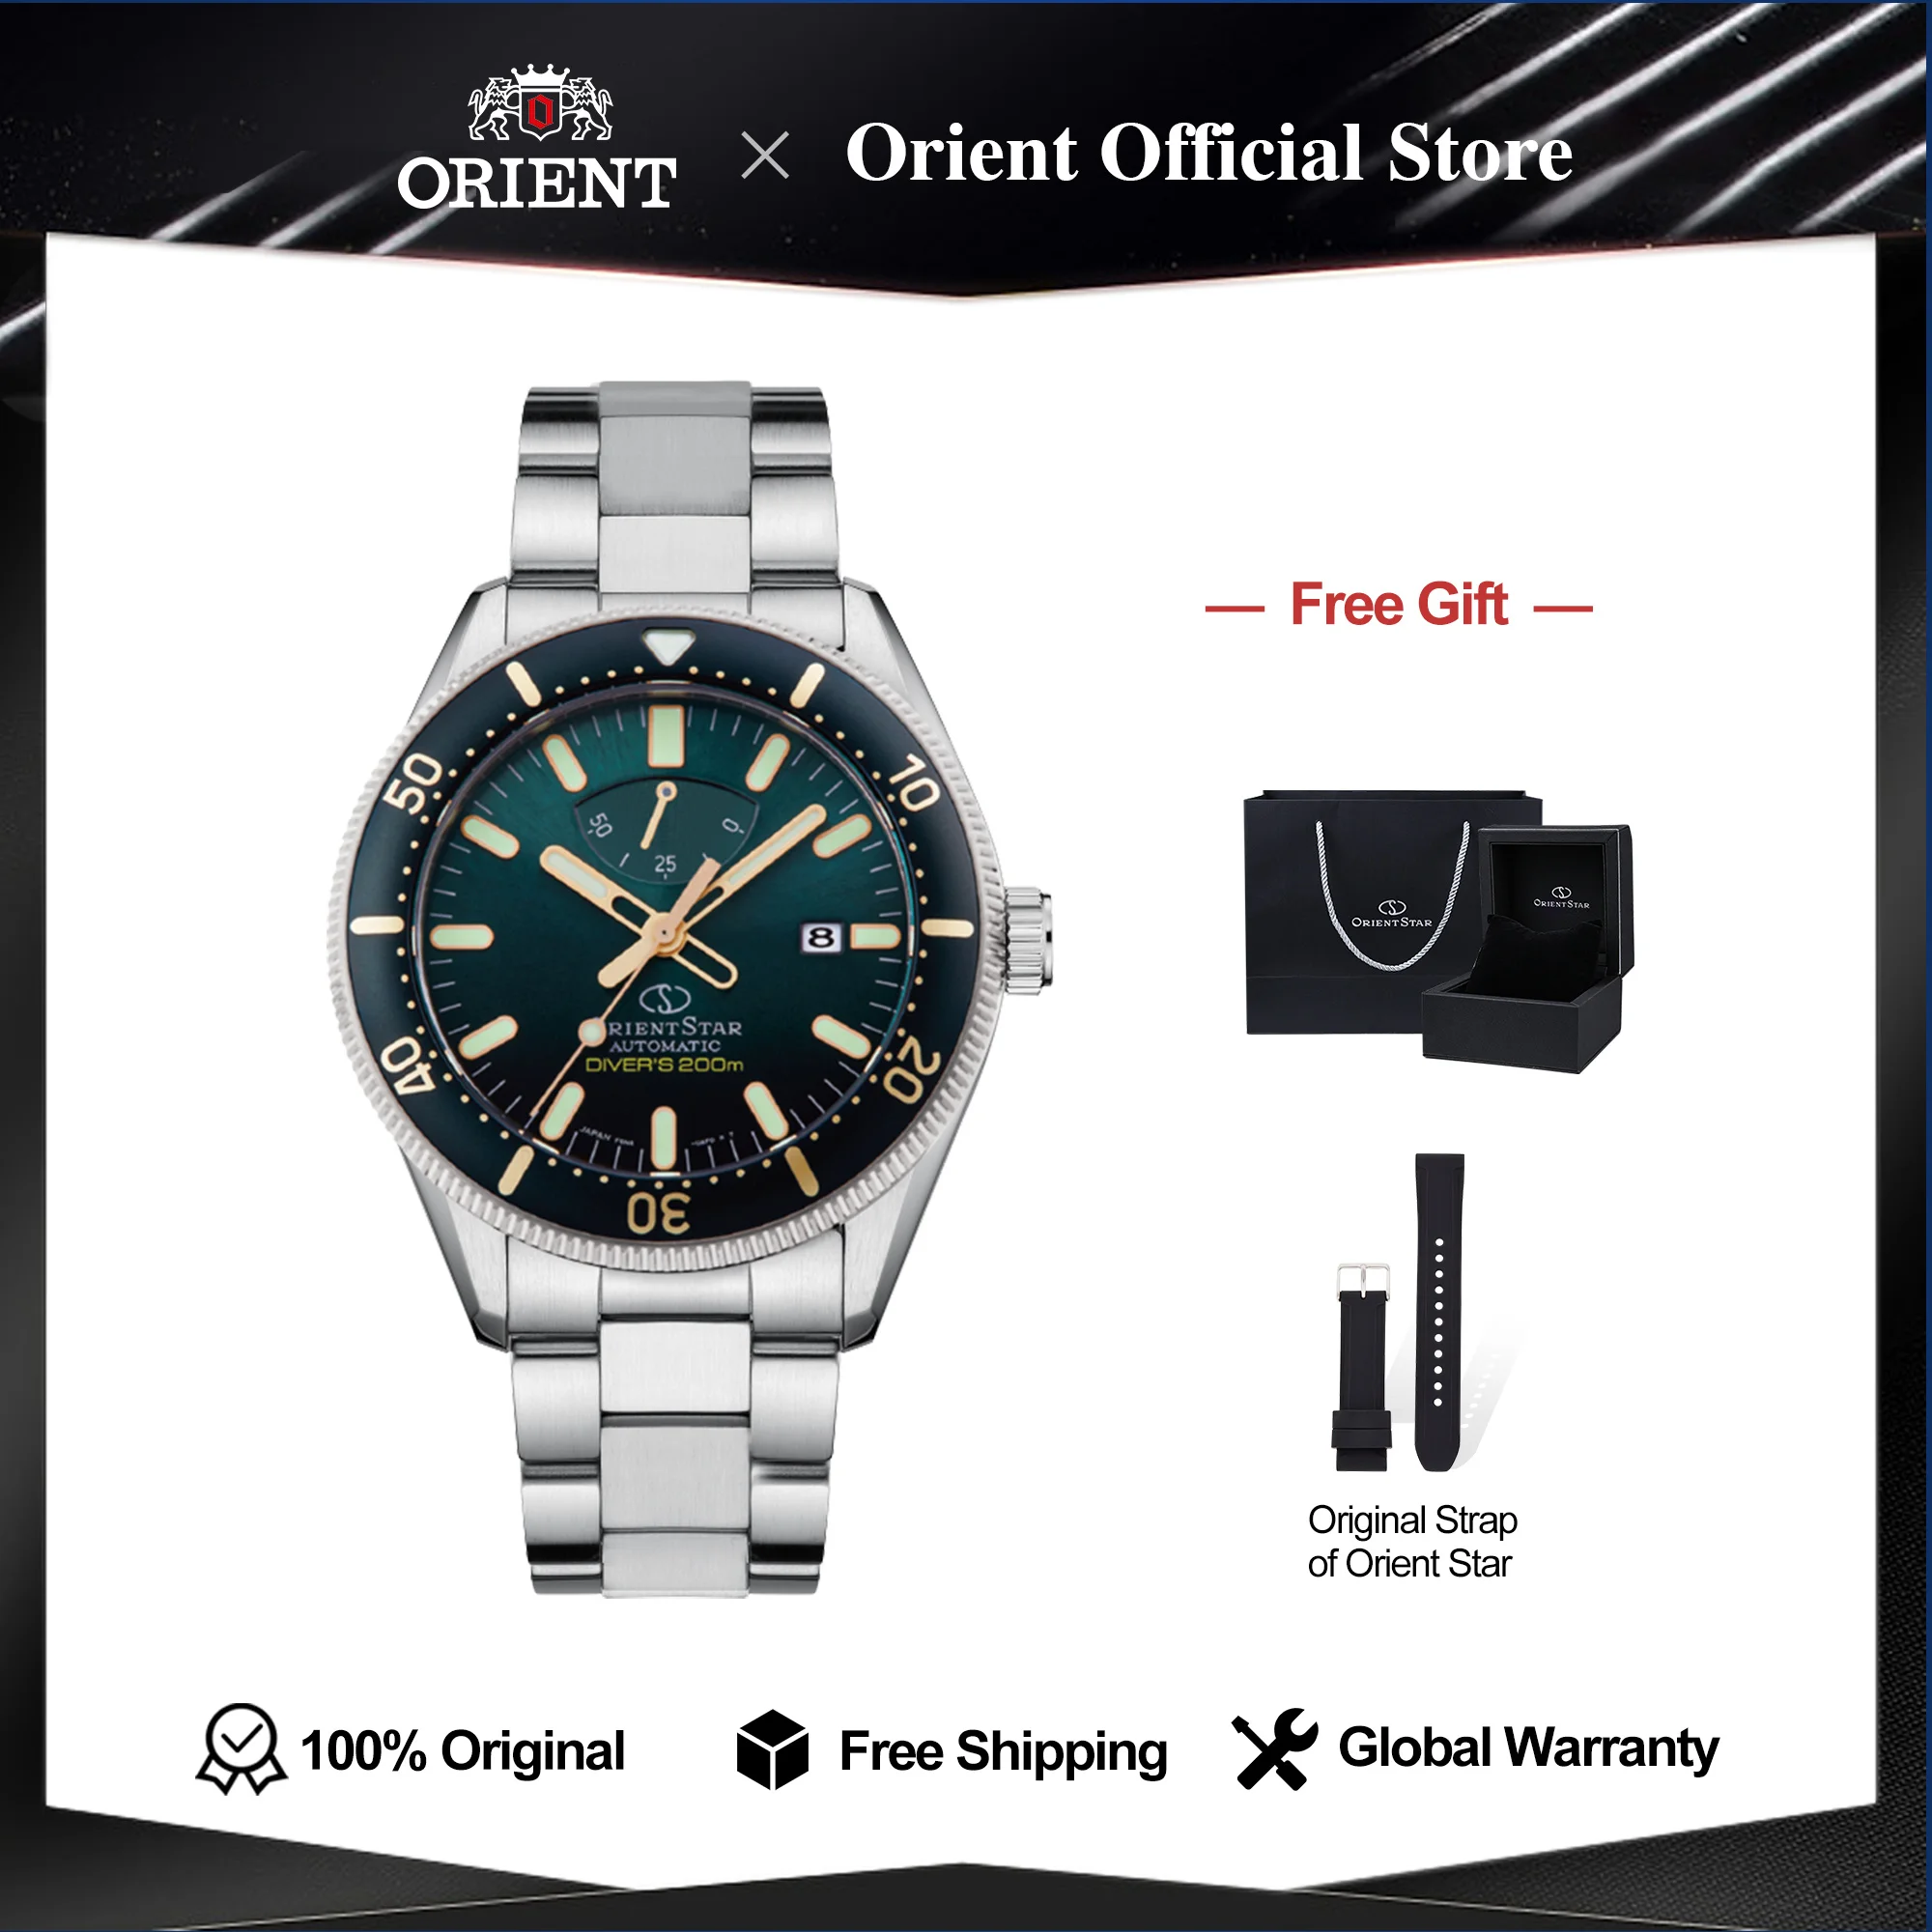 Original ORIENT STAR 200m ISO Professional Diving Watch Man,Japanese 44mm Sapphire Crystal Watch for Men Power Reserve Indicator